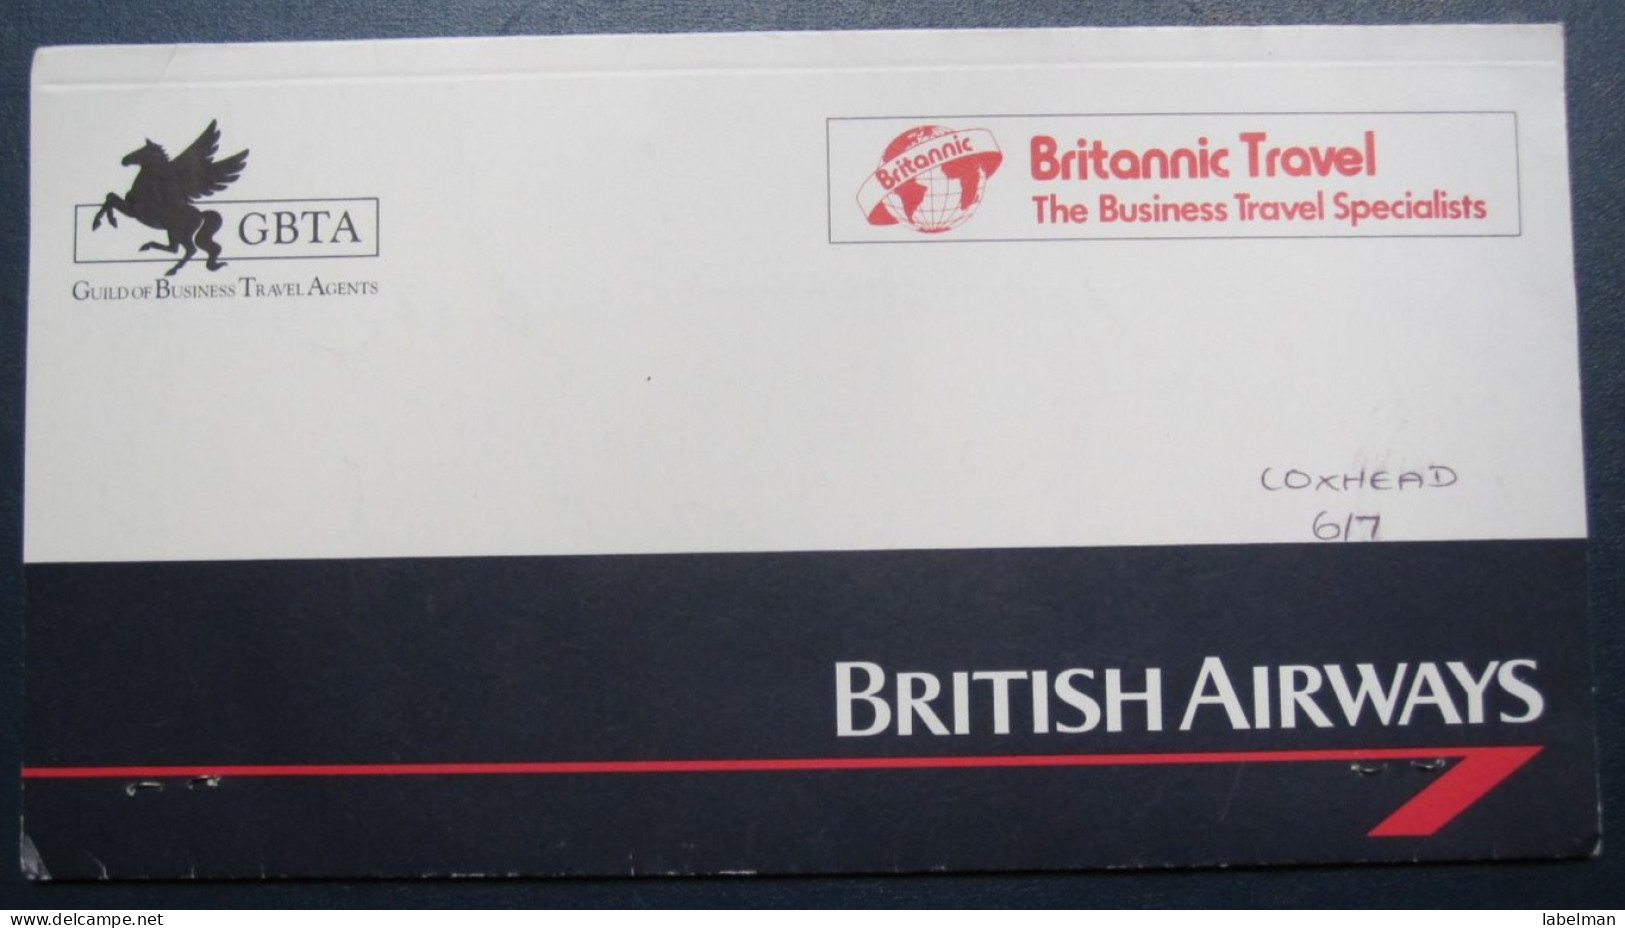 UK UNITED KINGDOM ENGLAND BRITISH AIRWAYS AIRLINE TICKET HOLDER BOOKLET VIP TAG LUGGAGE BAGGAGE PLANE AIRCRAFT AIRPORT - World